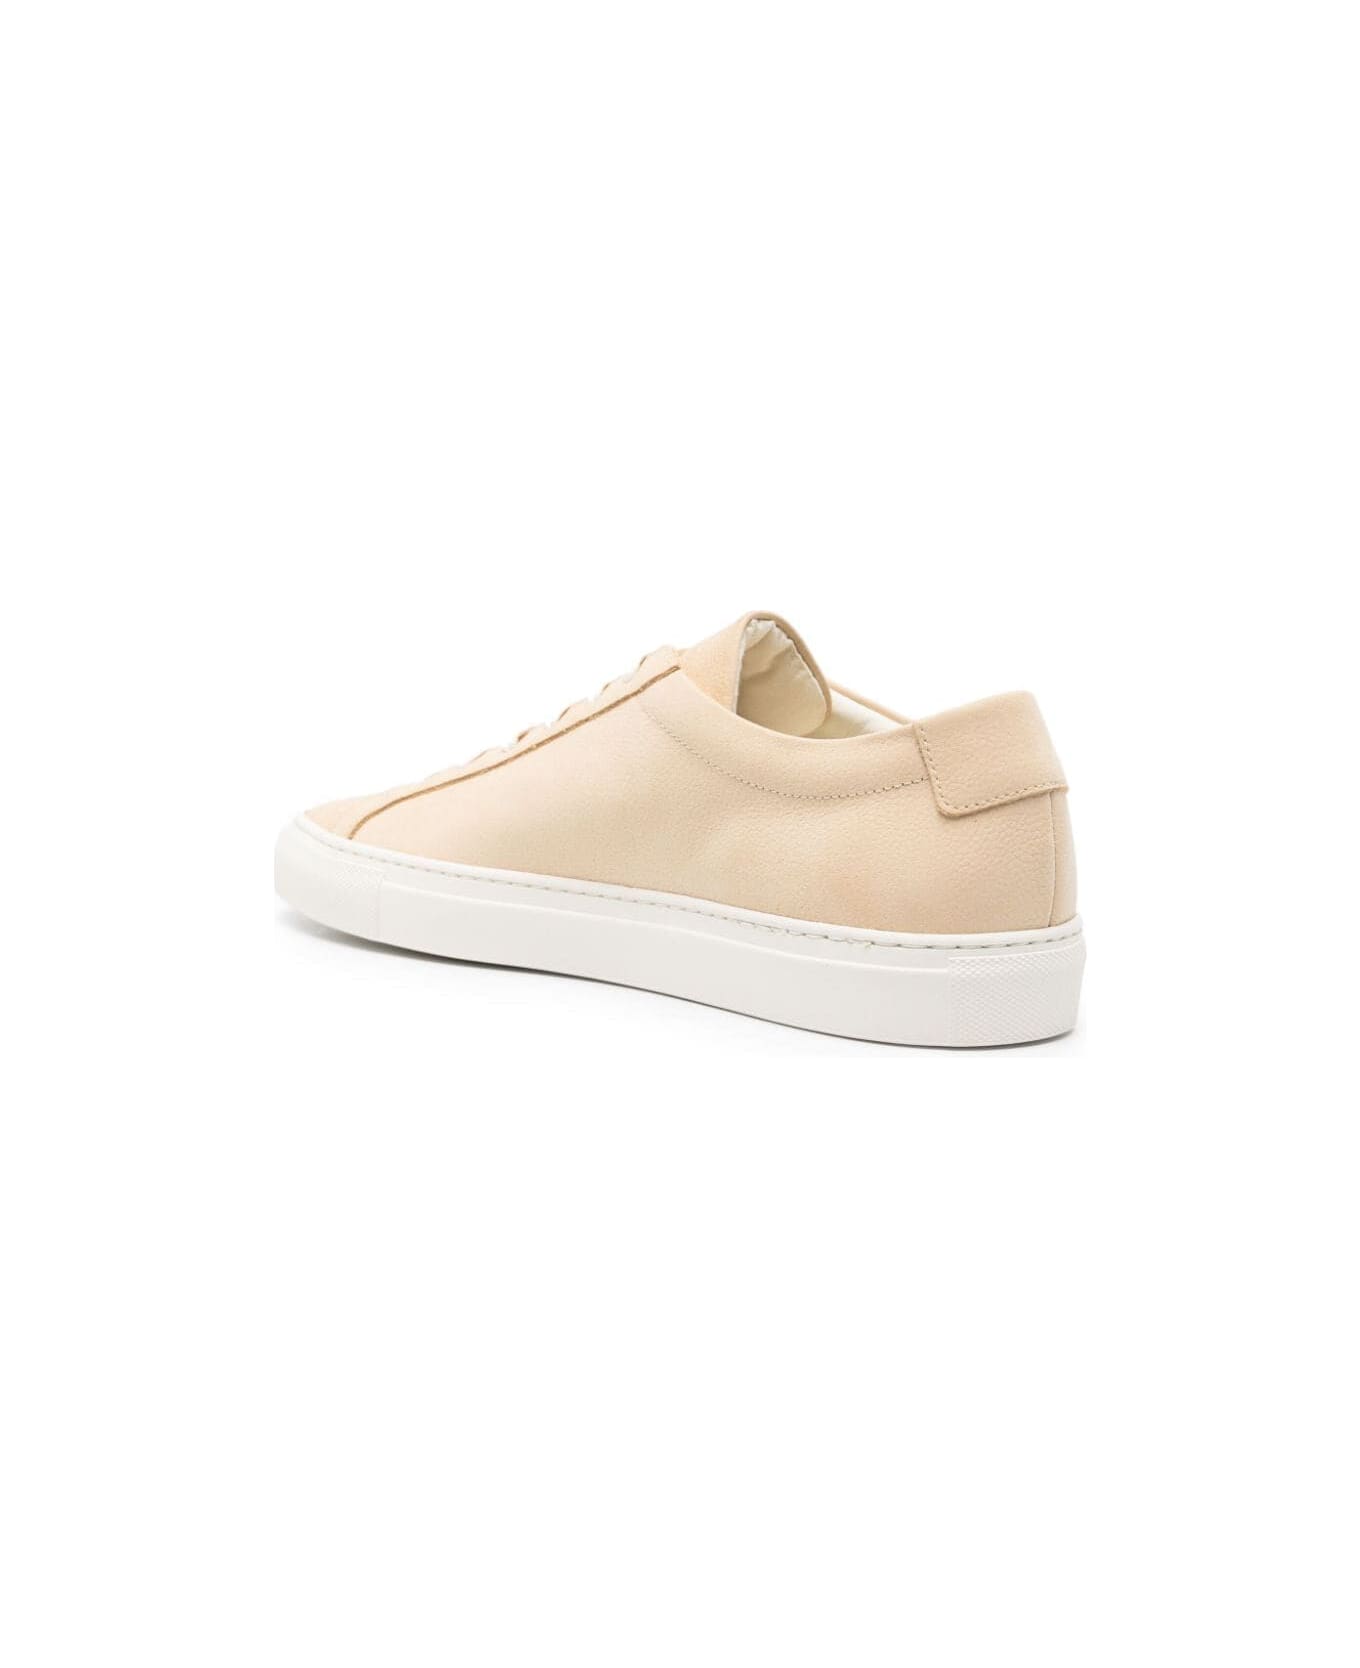 Common Projects Contrast Achilles Sneaker - Tan スニーカー